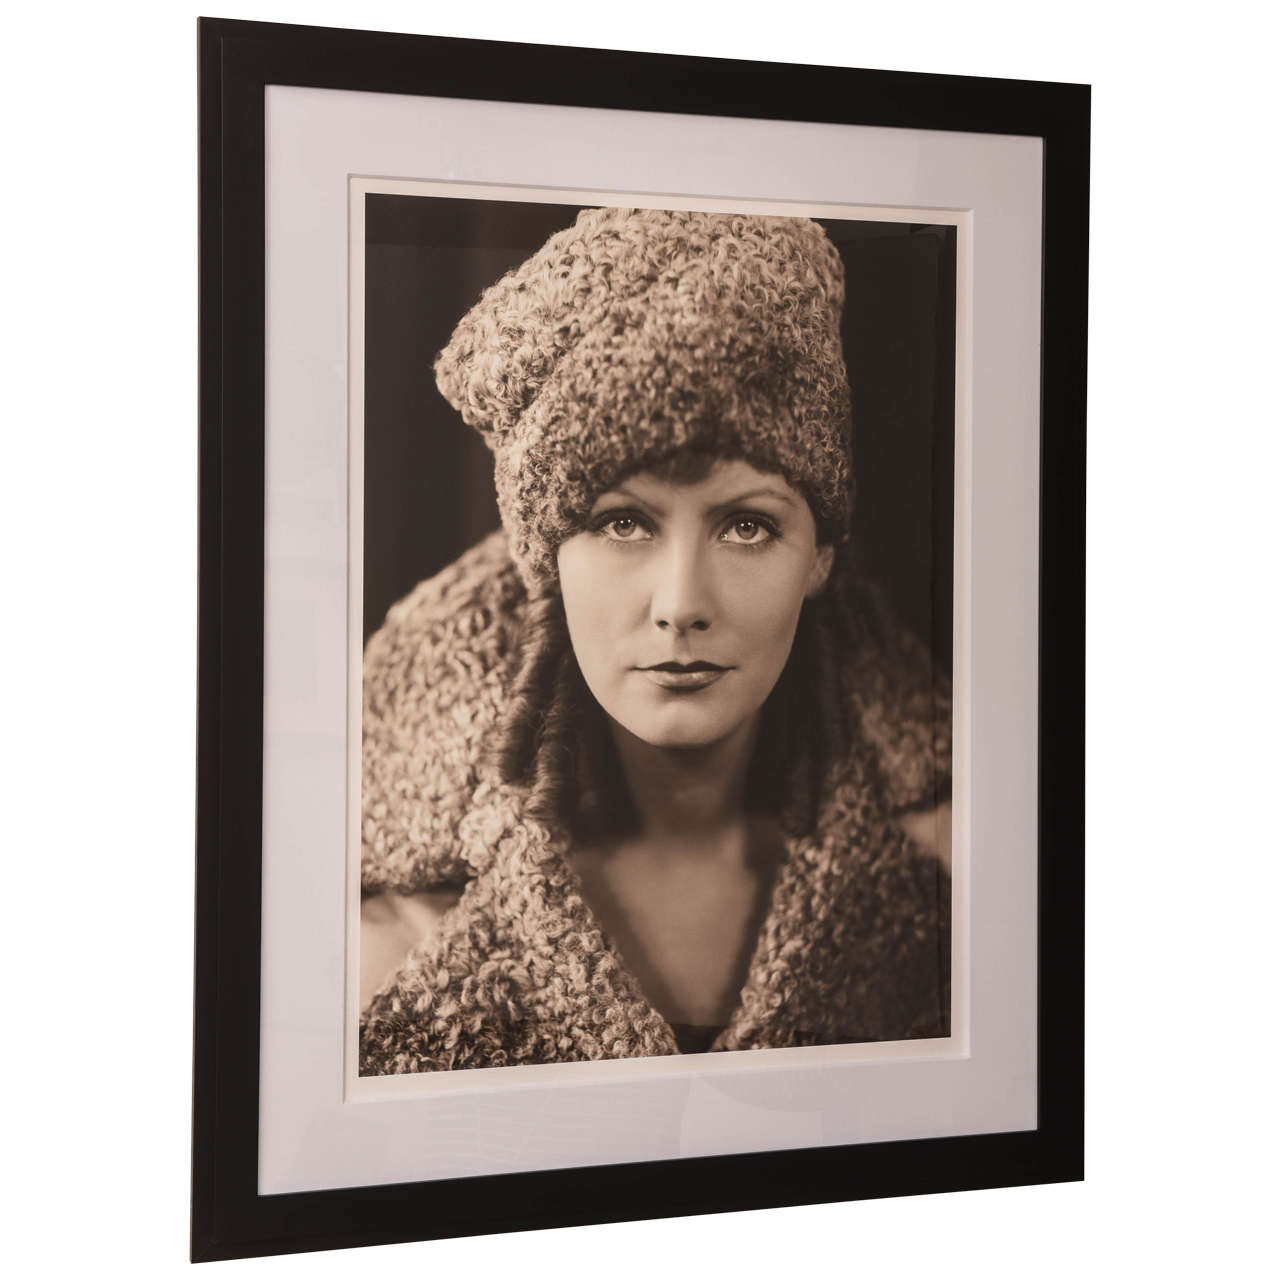 Framed Archival Pigment Photograph of Greta Garbo:  George Hurrell, 1936